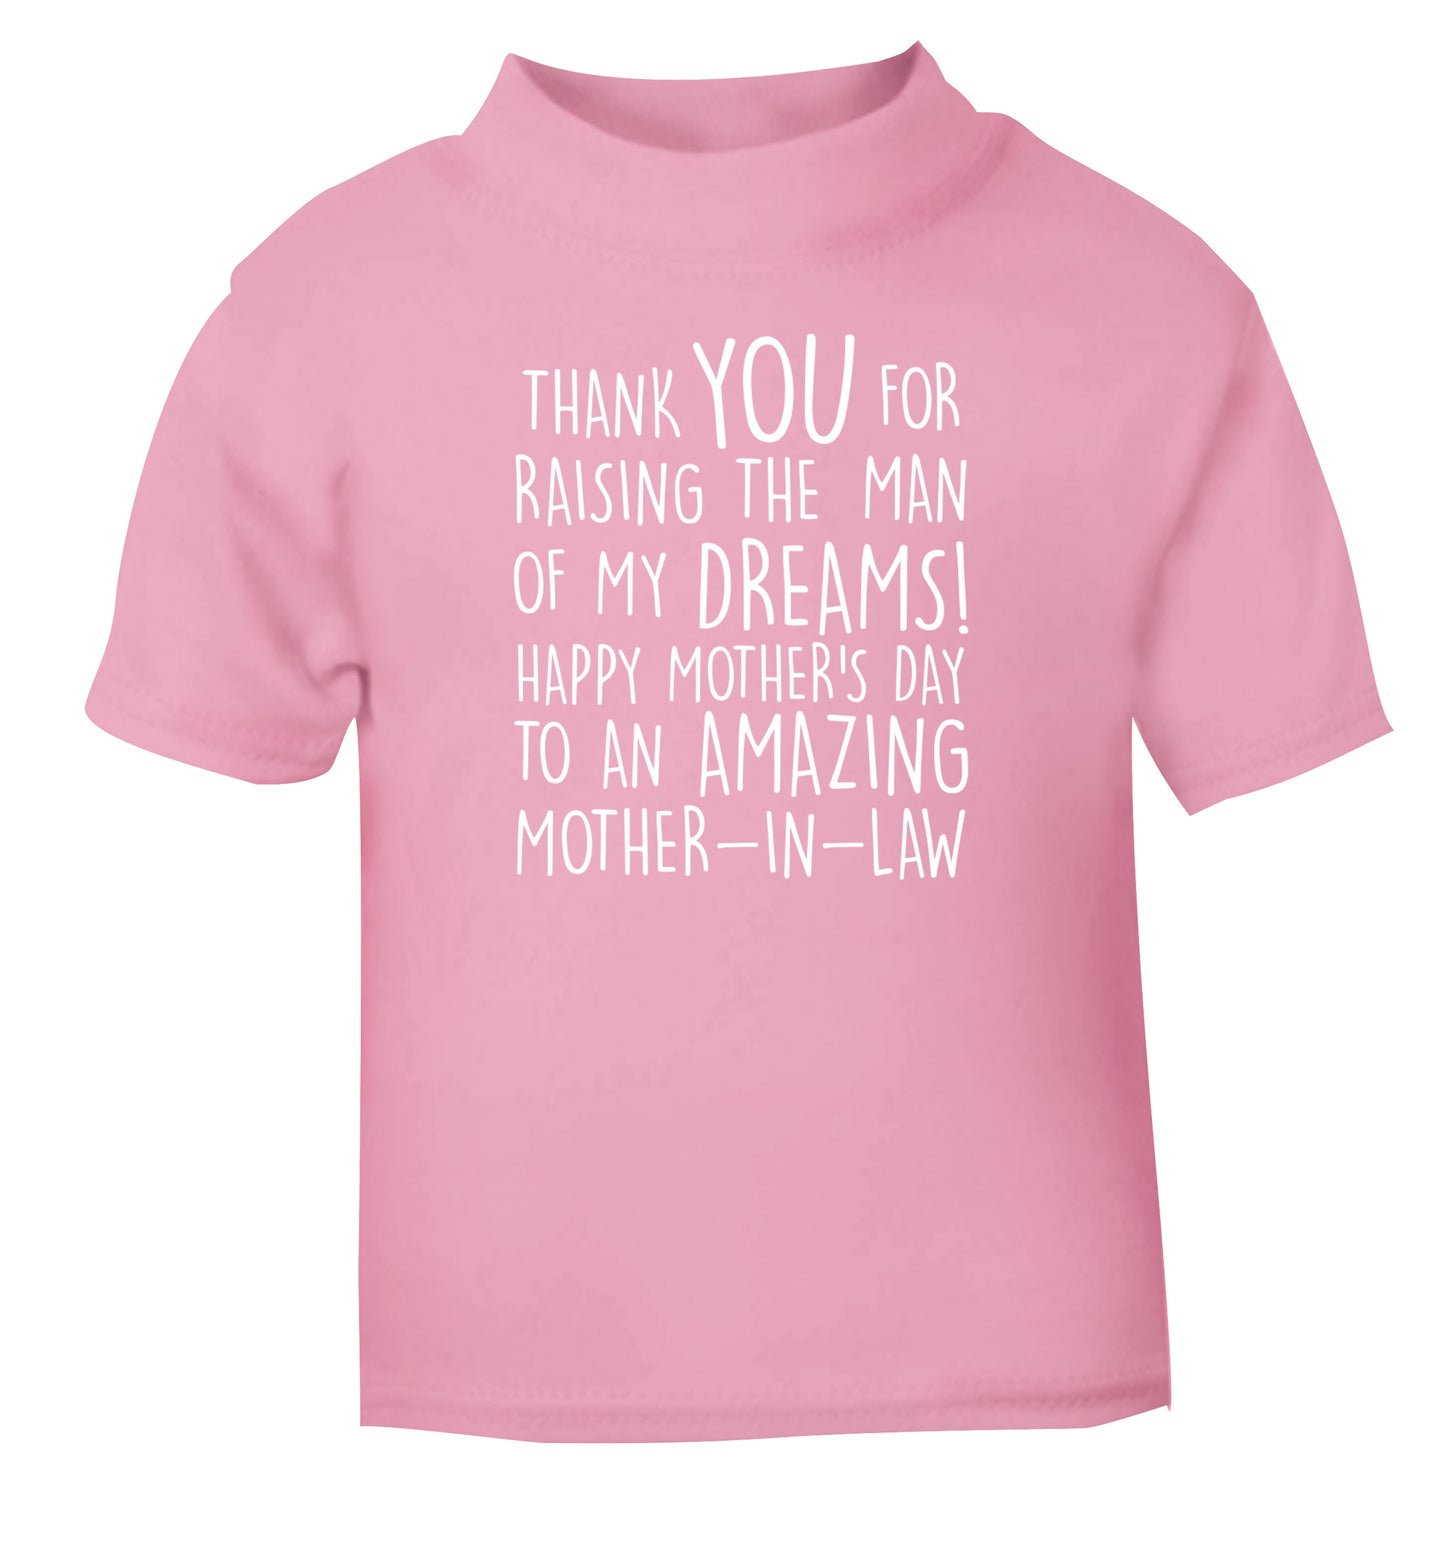 Thank you for raising the man of my dreams happy mother's day mother-in-law light pink Baby Toddler Tshirt 2 Years